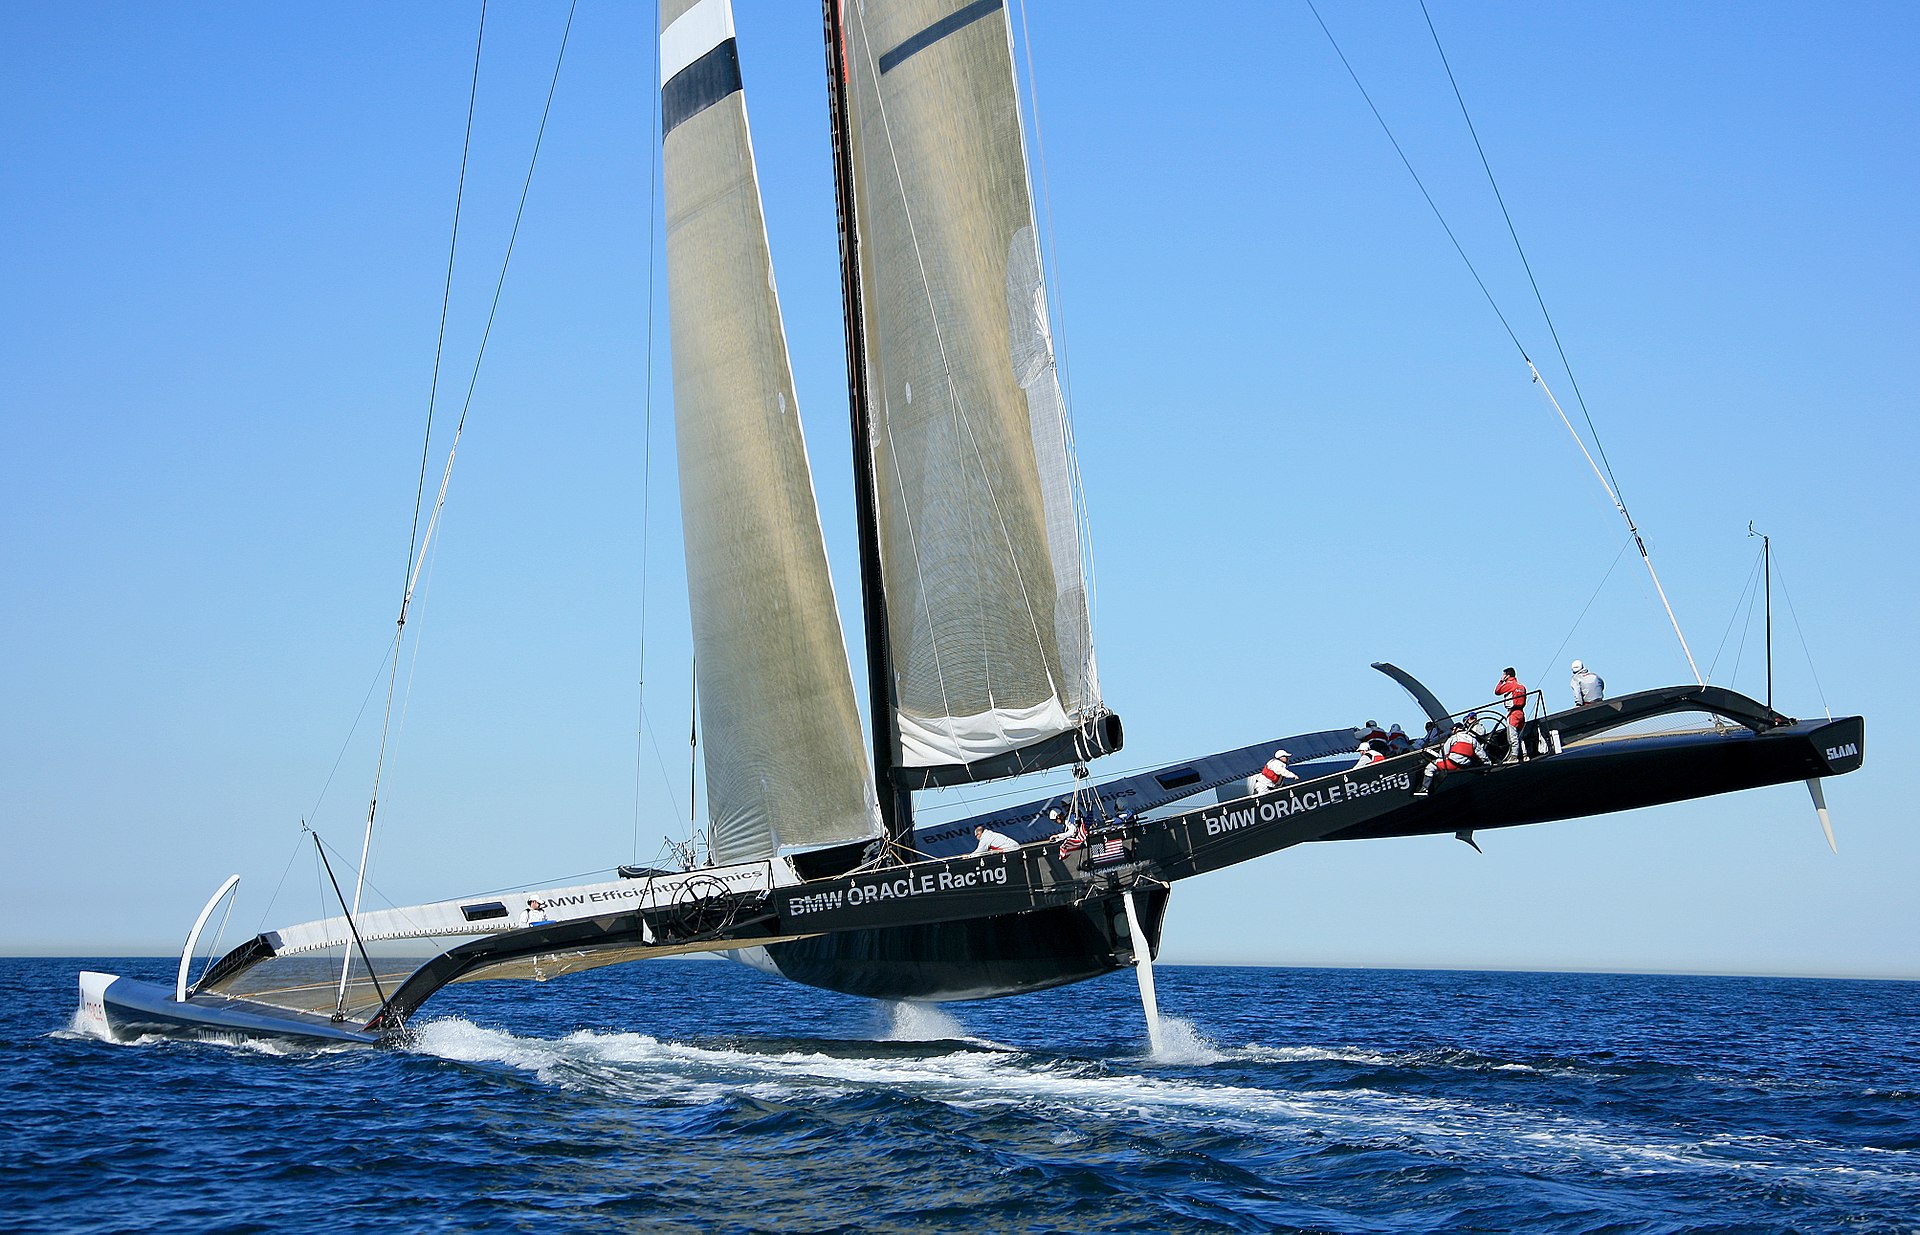 Crewmen look like dwarfs on the massive trimaran. Its original design, shown here in trials off San Diego, included a conventional sail. Photo by Limeydal.